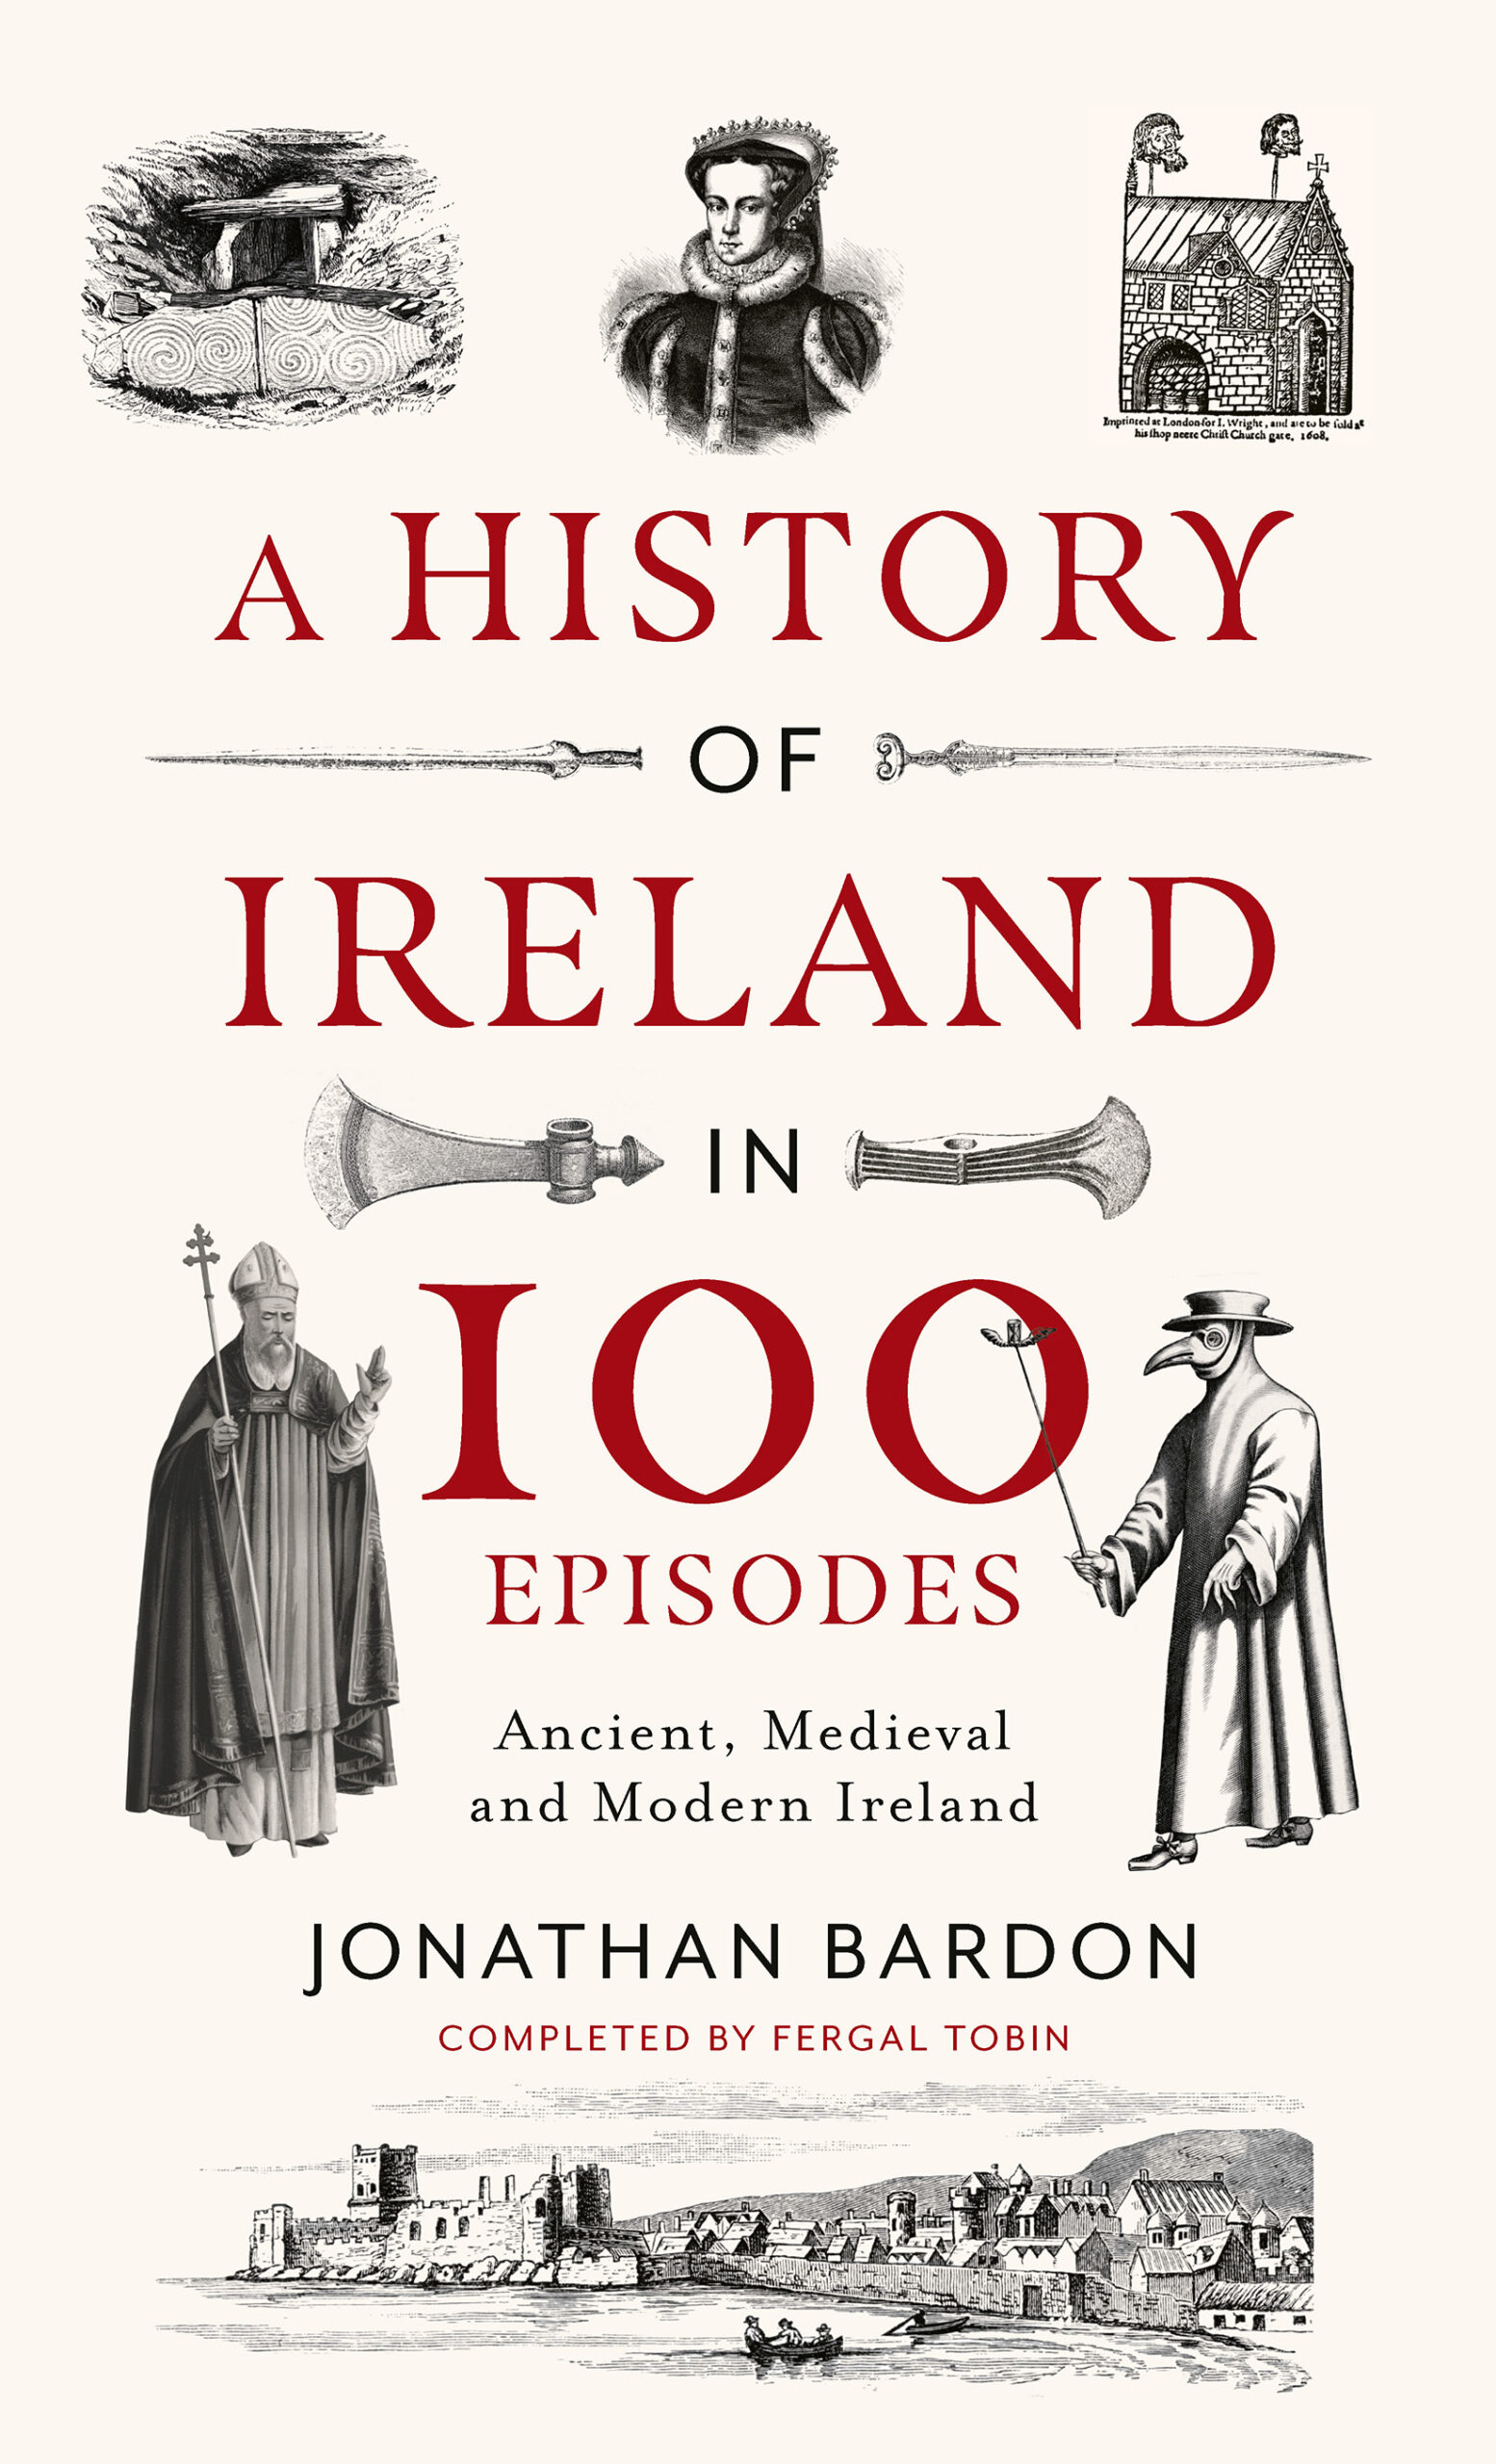 A History of Ireland in 100 Episodes | Jonathan Bardon | Charlie Byrne's